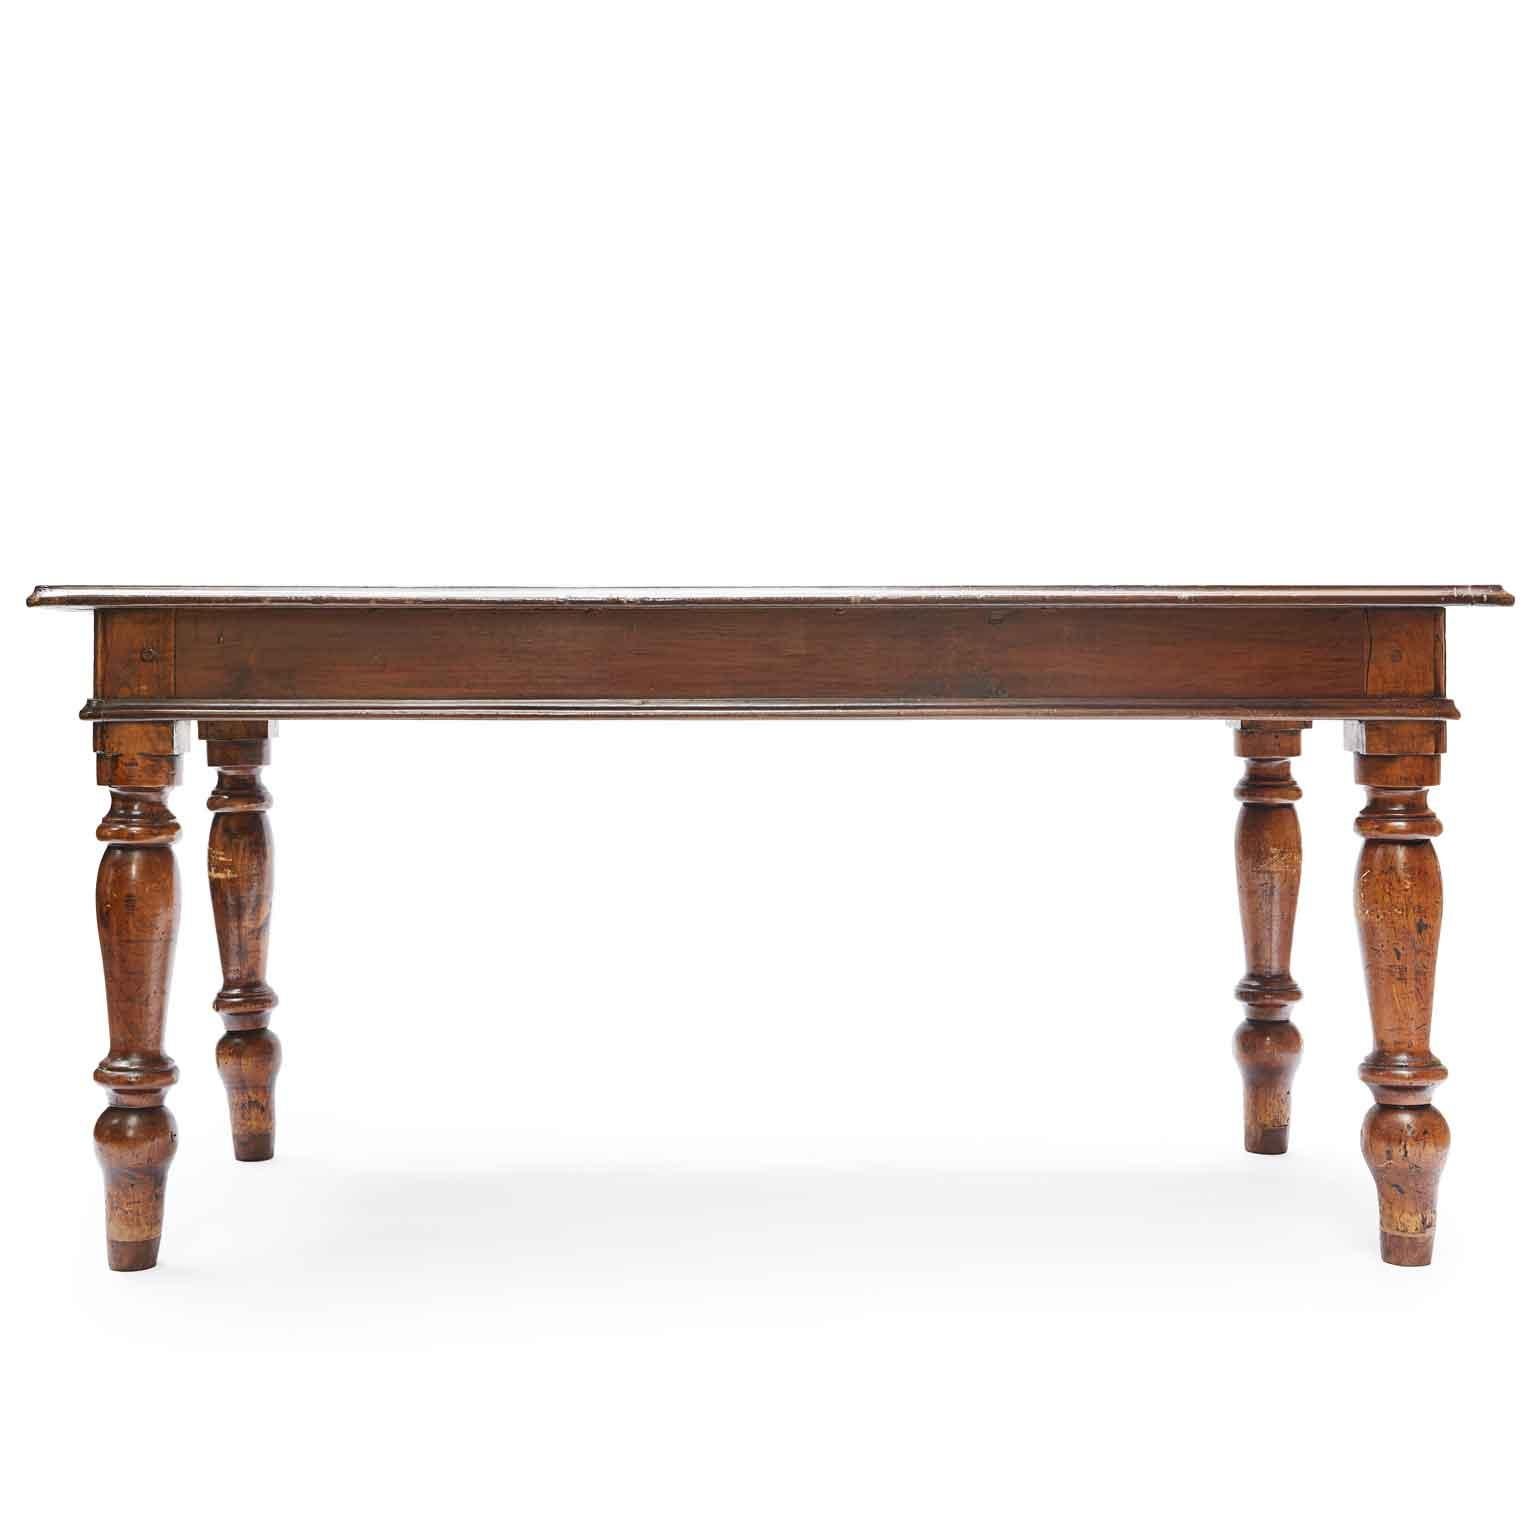 19th century Italian Lombard dining room center table made of solid walnut, rectangular top, one deep drawer on the long side, and two drawers on the short sides, alder turned legs.
In good condition, this antique Italian table dates back to the